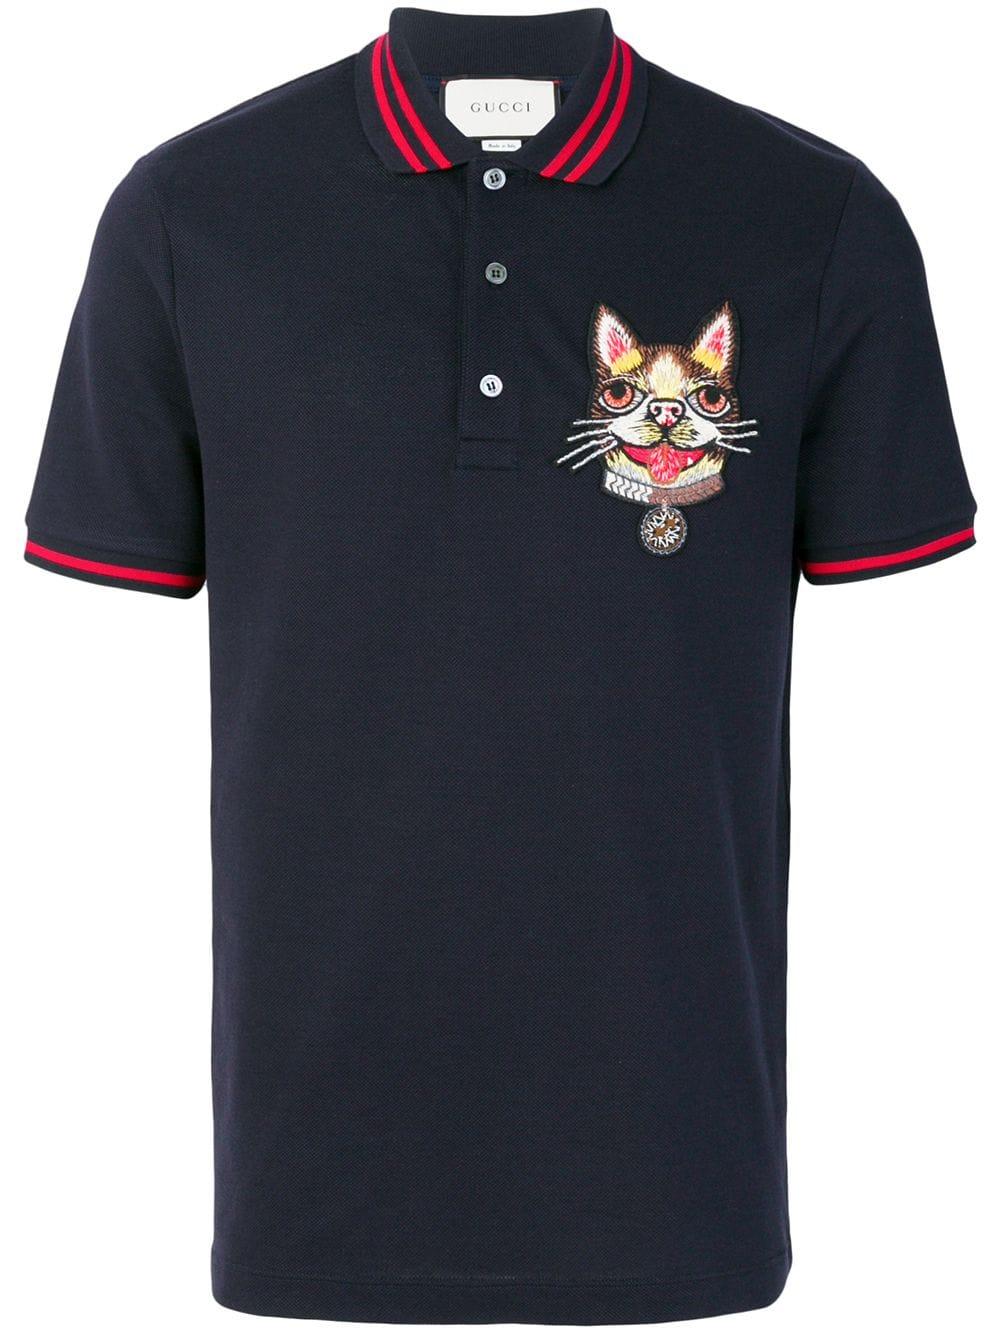 Gucci Cotton Dog Patch Polo Shirt in Blue for Men - Lyst